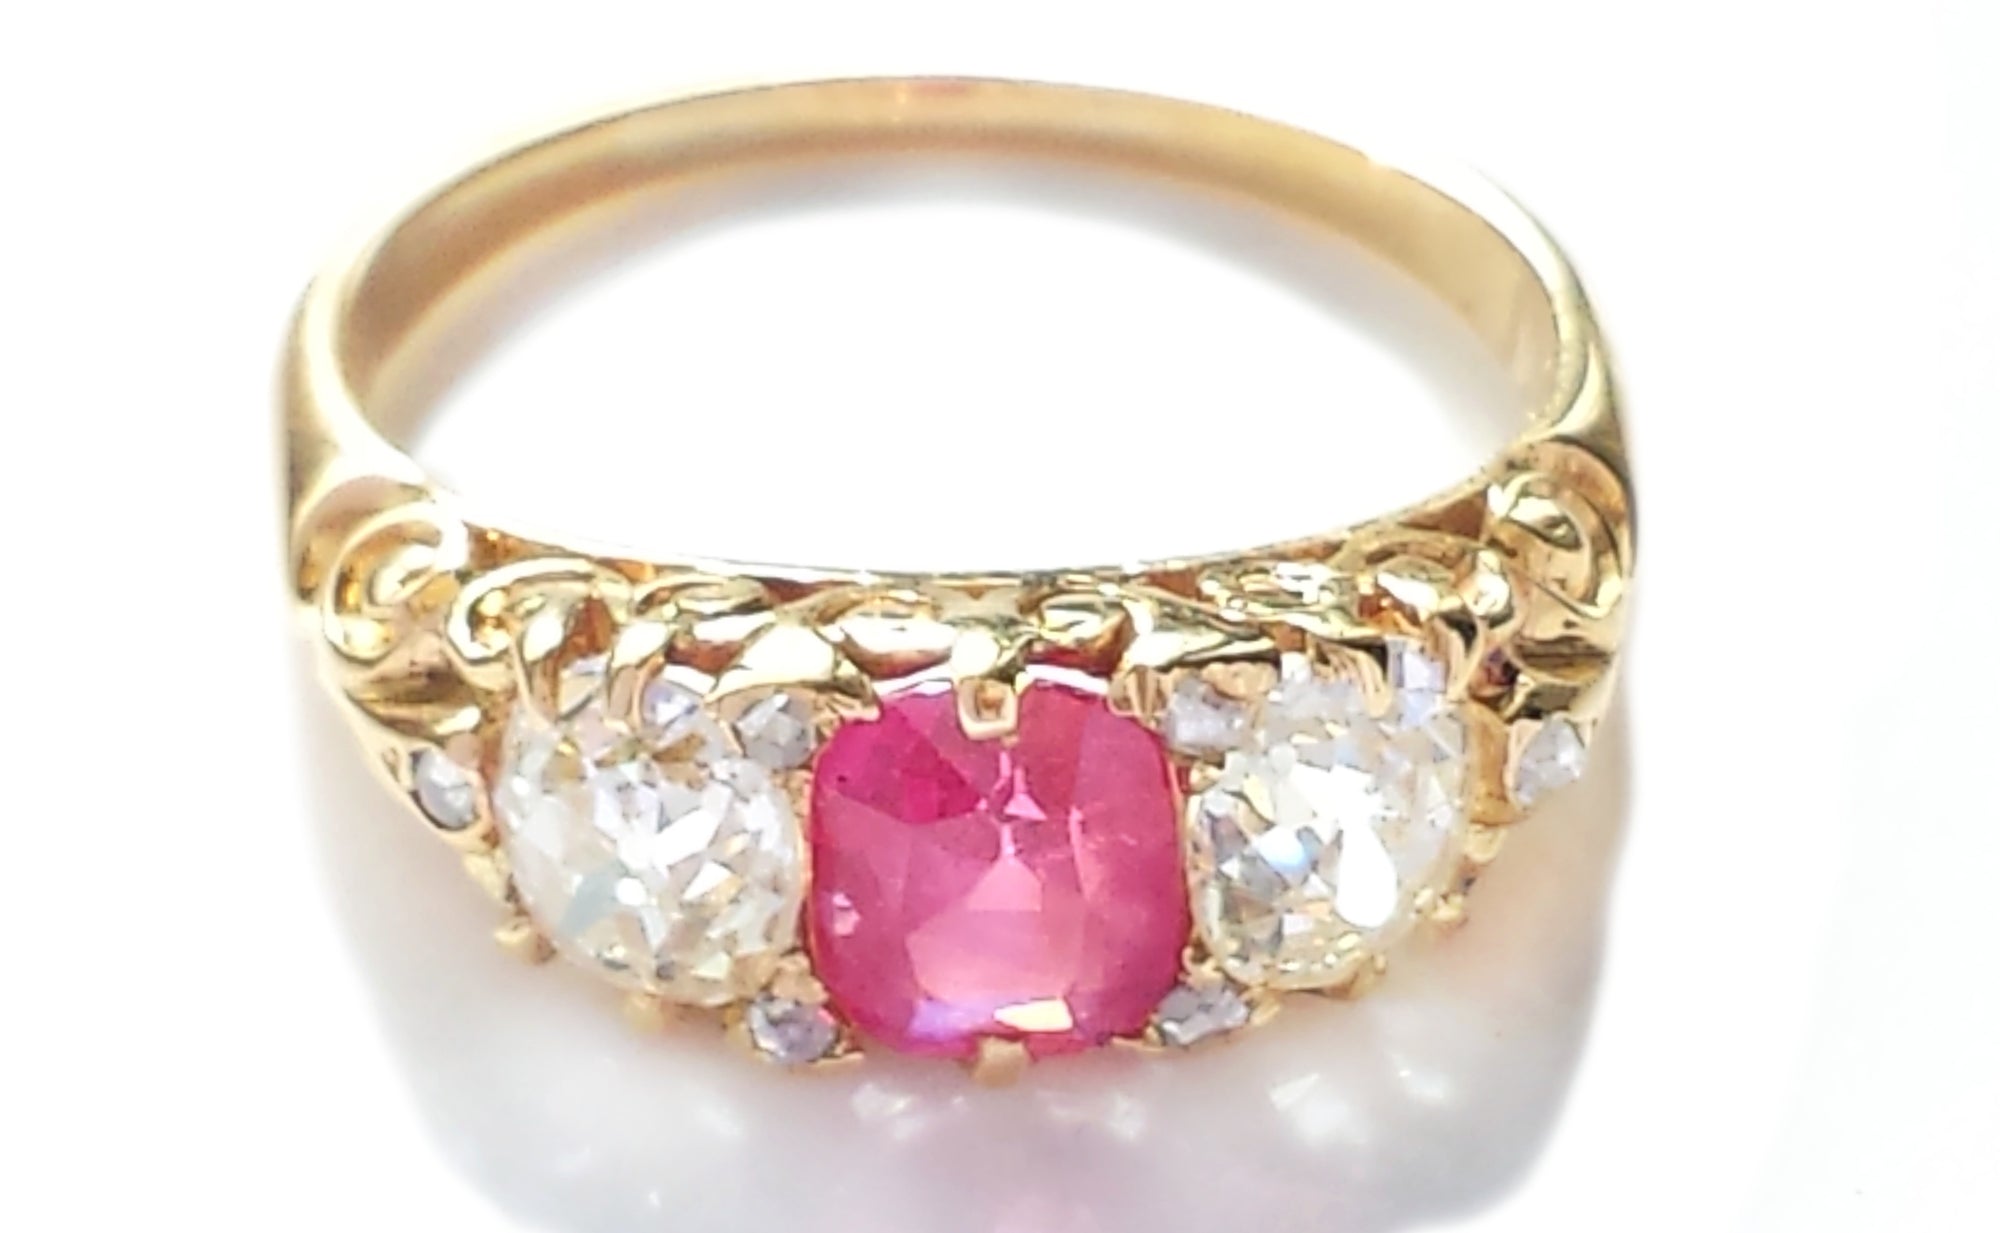 Antique Victorian 3-Stone 1.10ct Burmese Unheated Ruby & Old Cut Diamond Engagement Ring